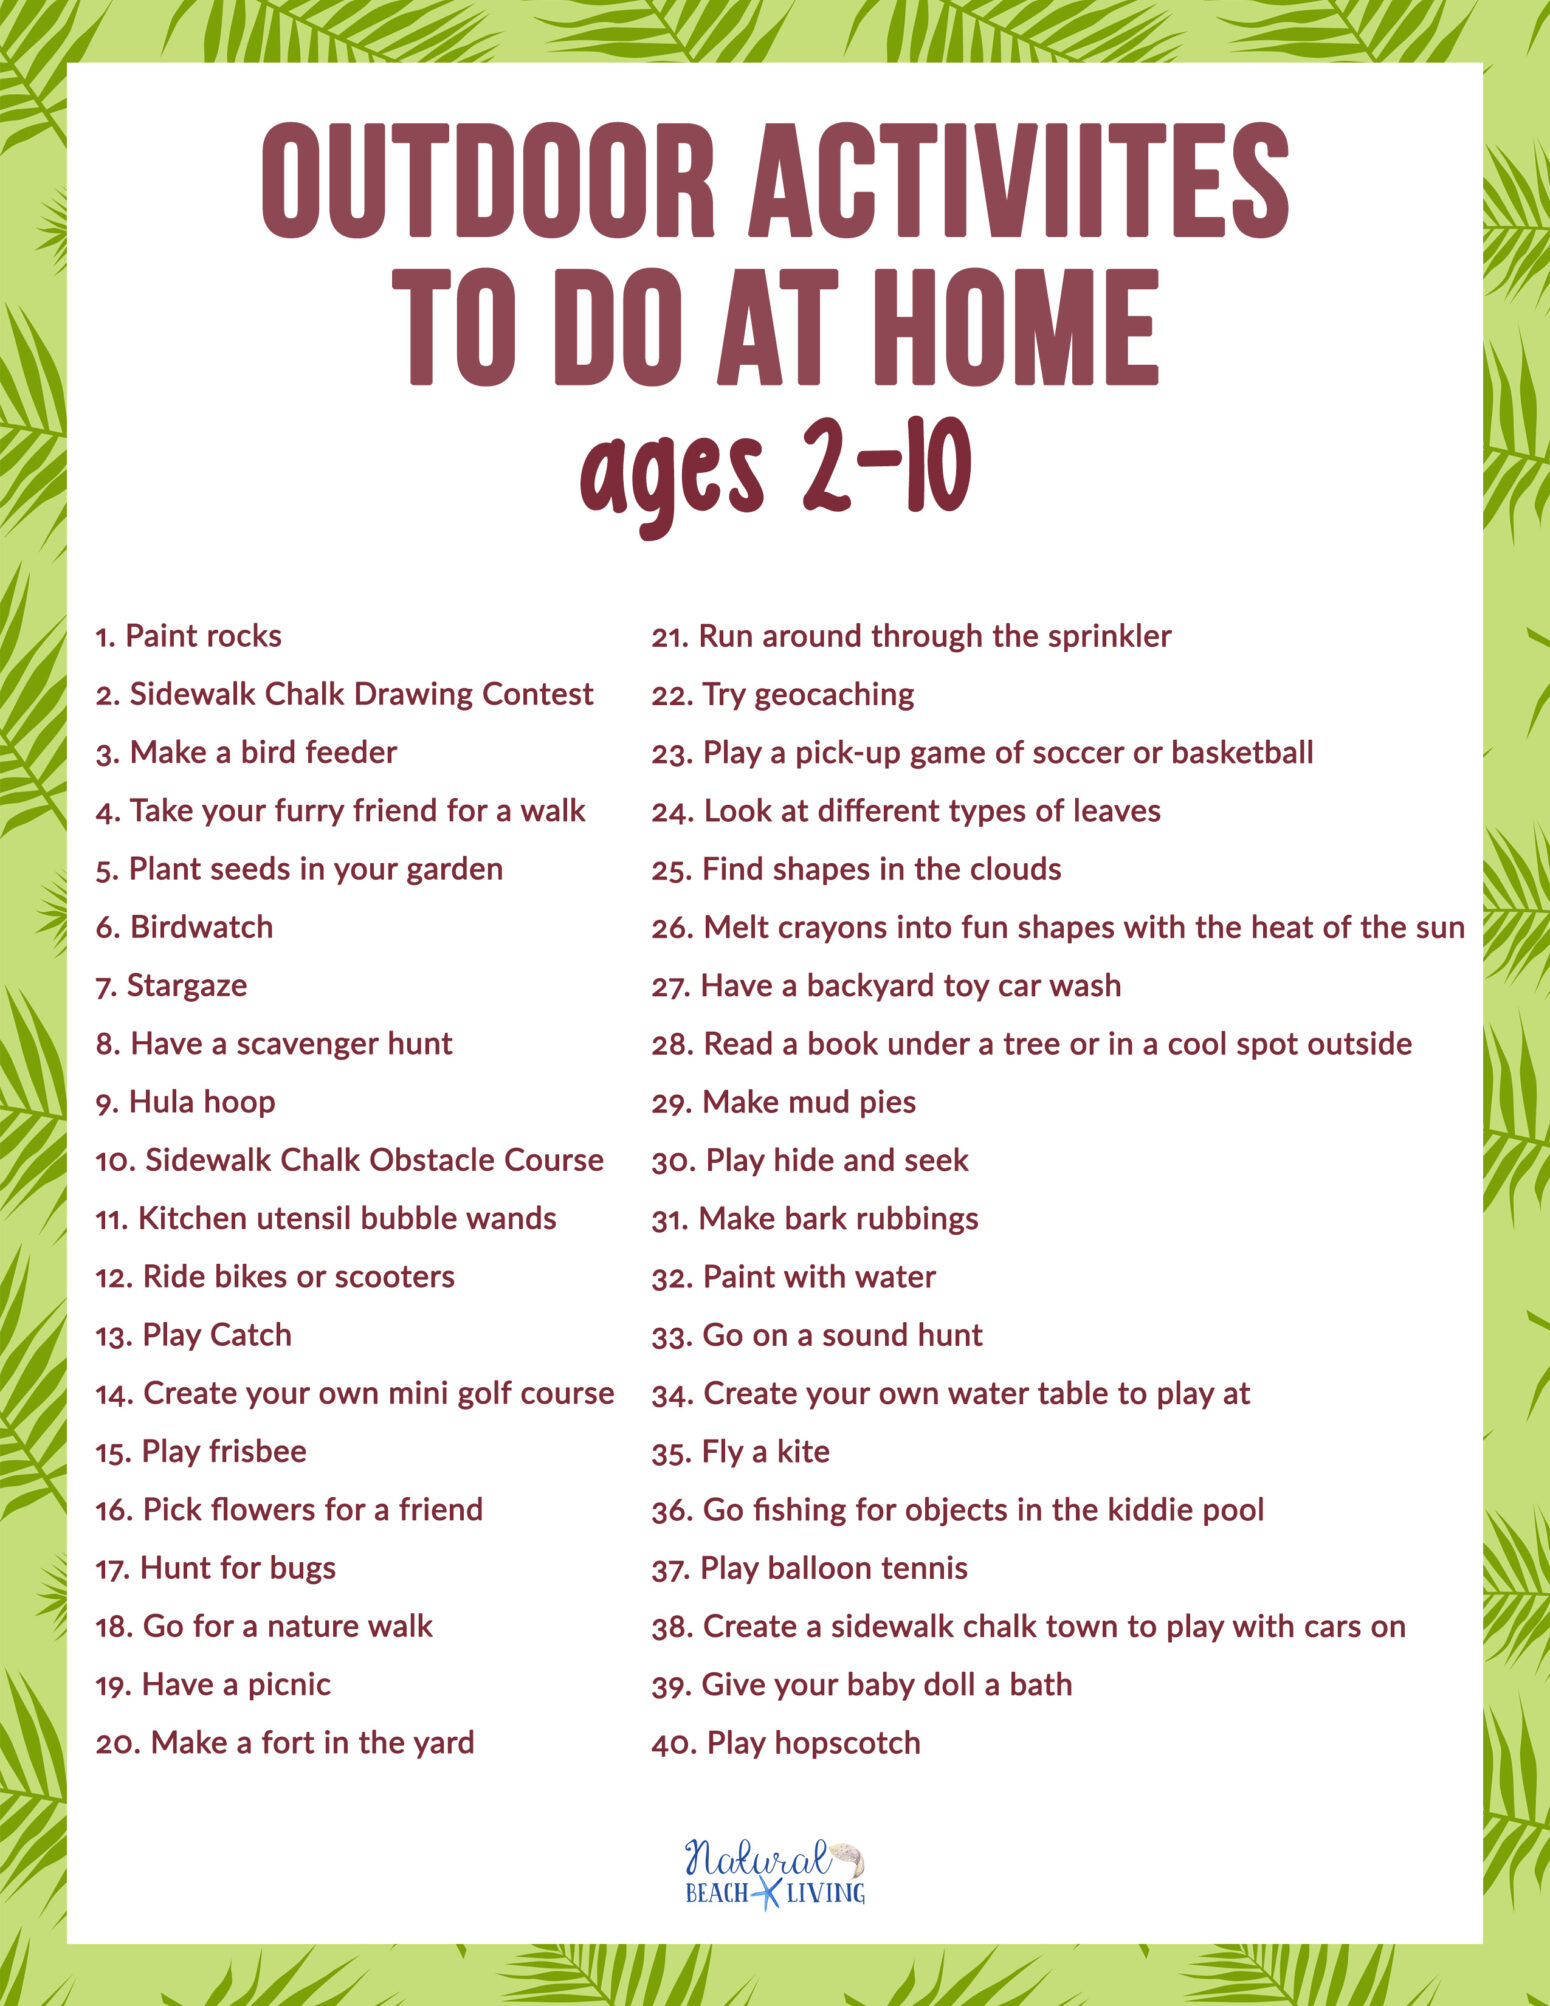 40+ Outdoor Activities to Do at Home for Kids age 2-10 – Free Outdoor Activities Checklist